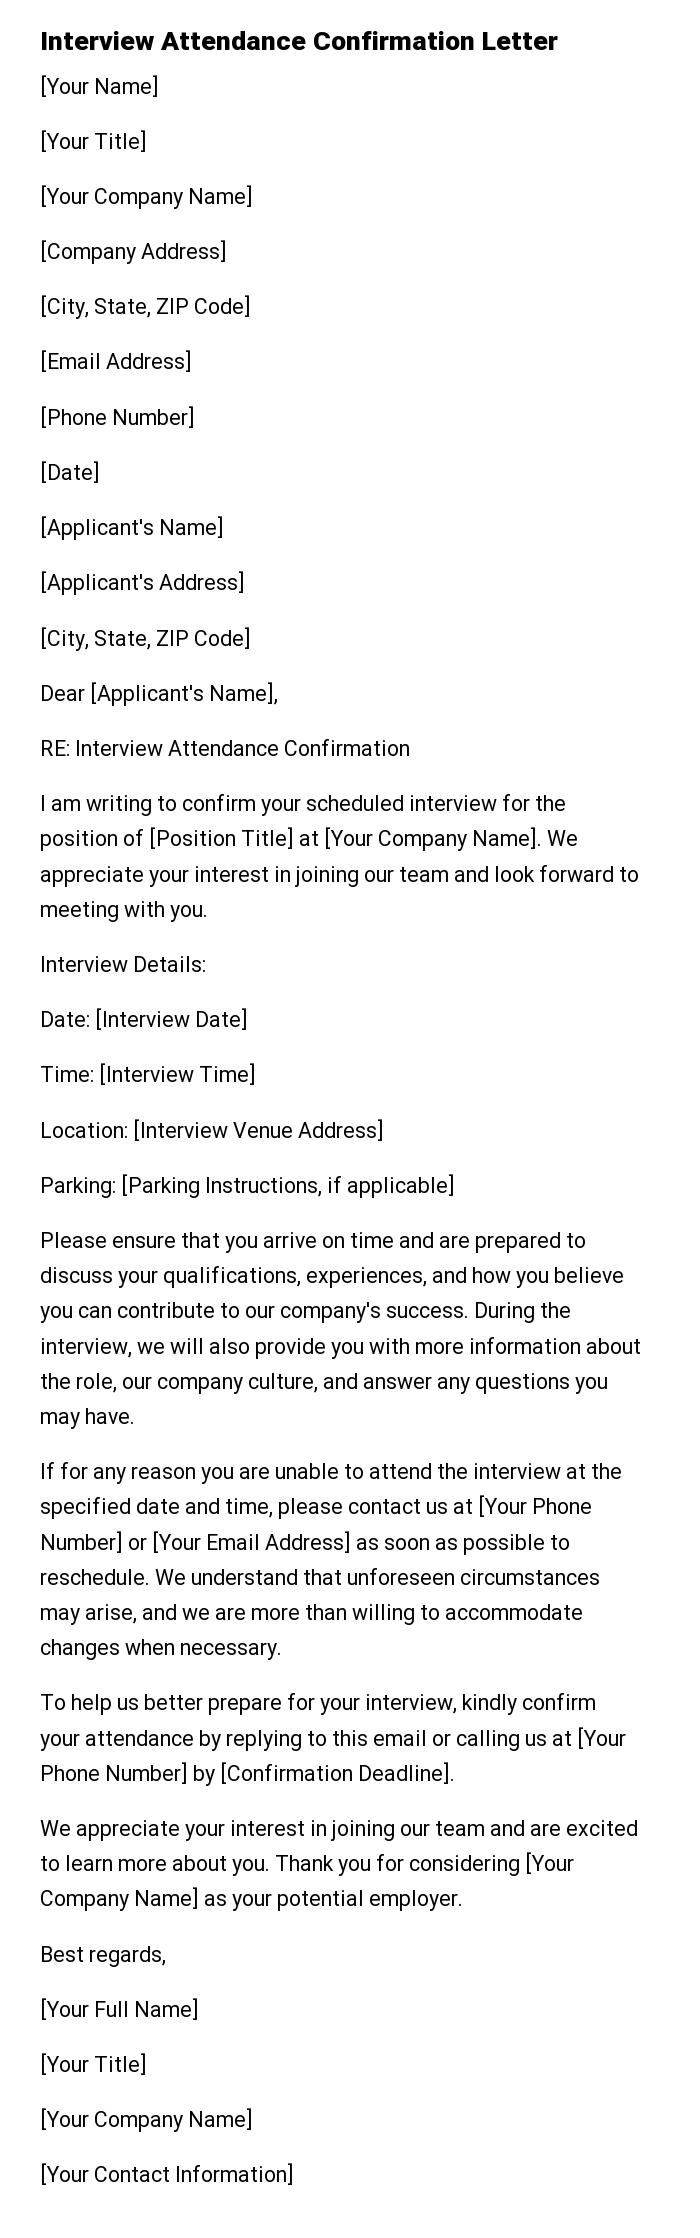 Interview Attendance Confirmation Letter